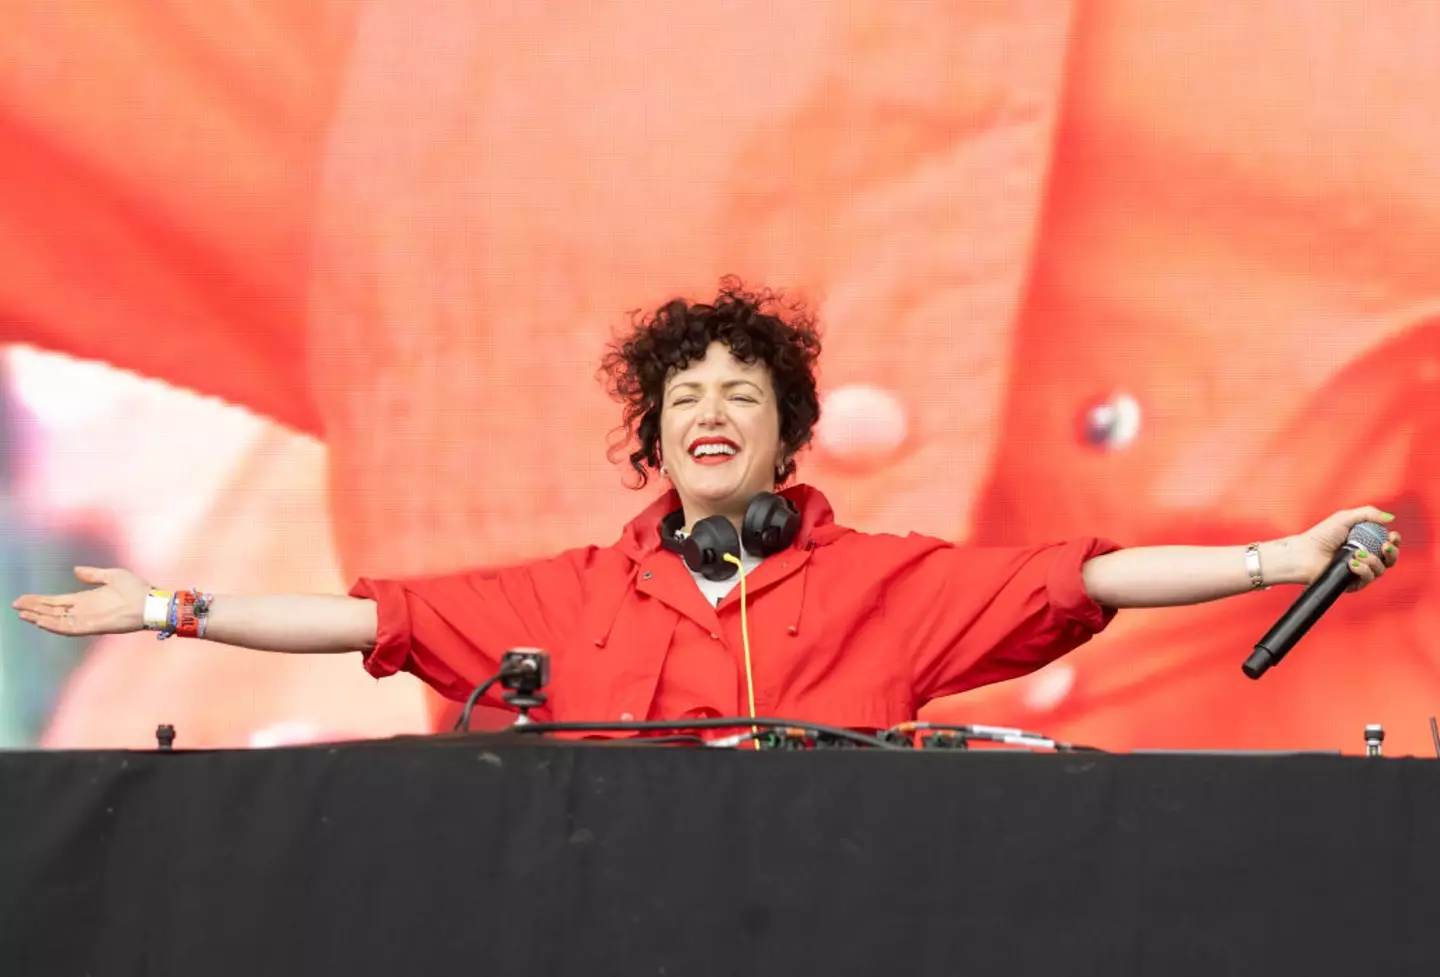 DJ Annie Mac performed on the Other Stage during day three of Glastonbury. (Samir Hussein / Contributor / Getty Images)